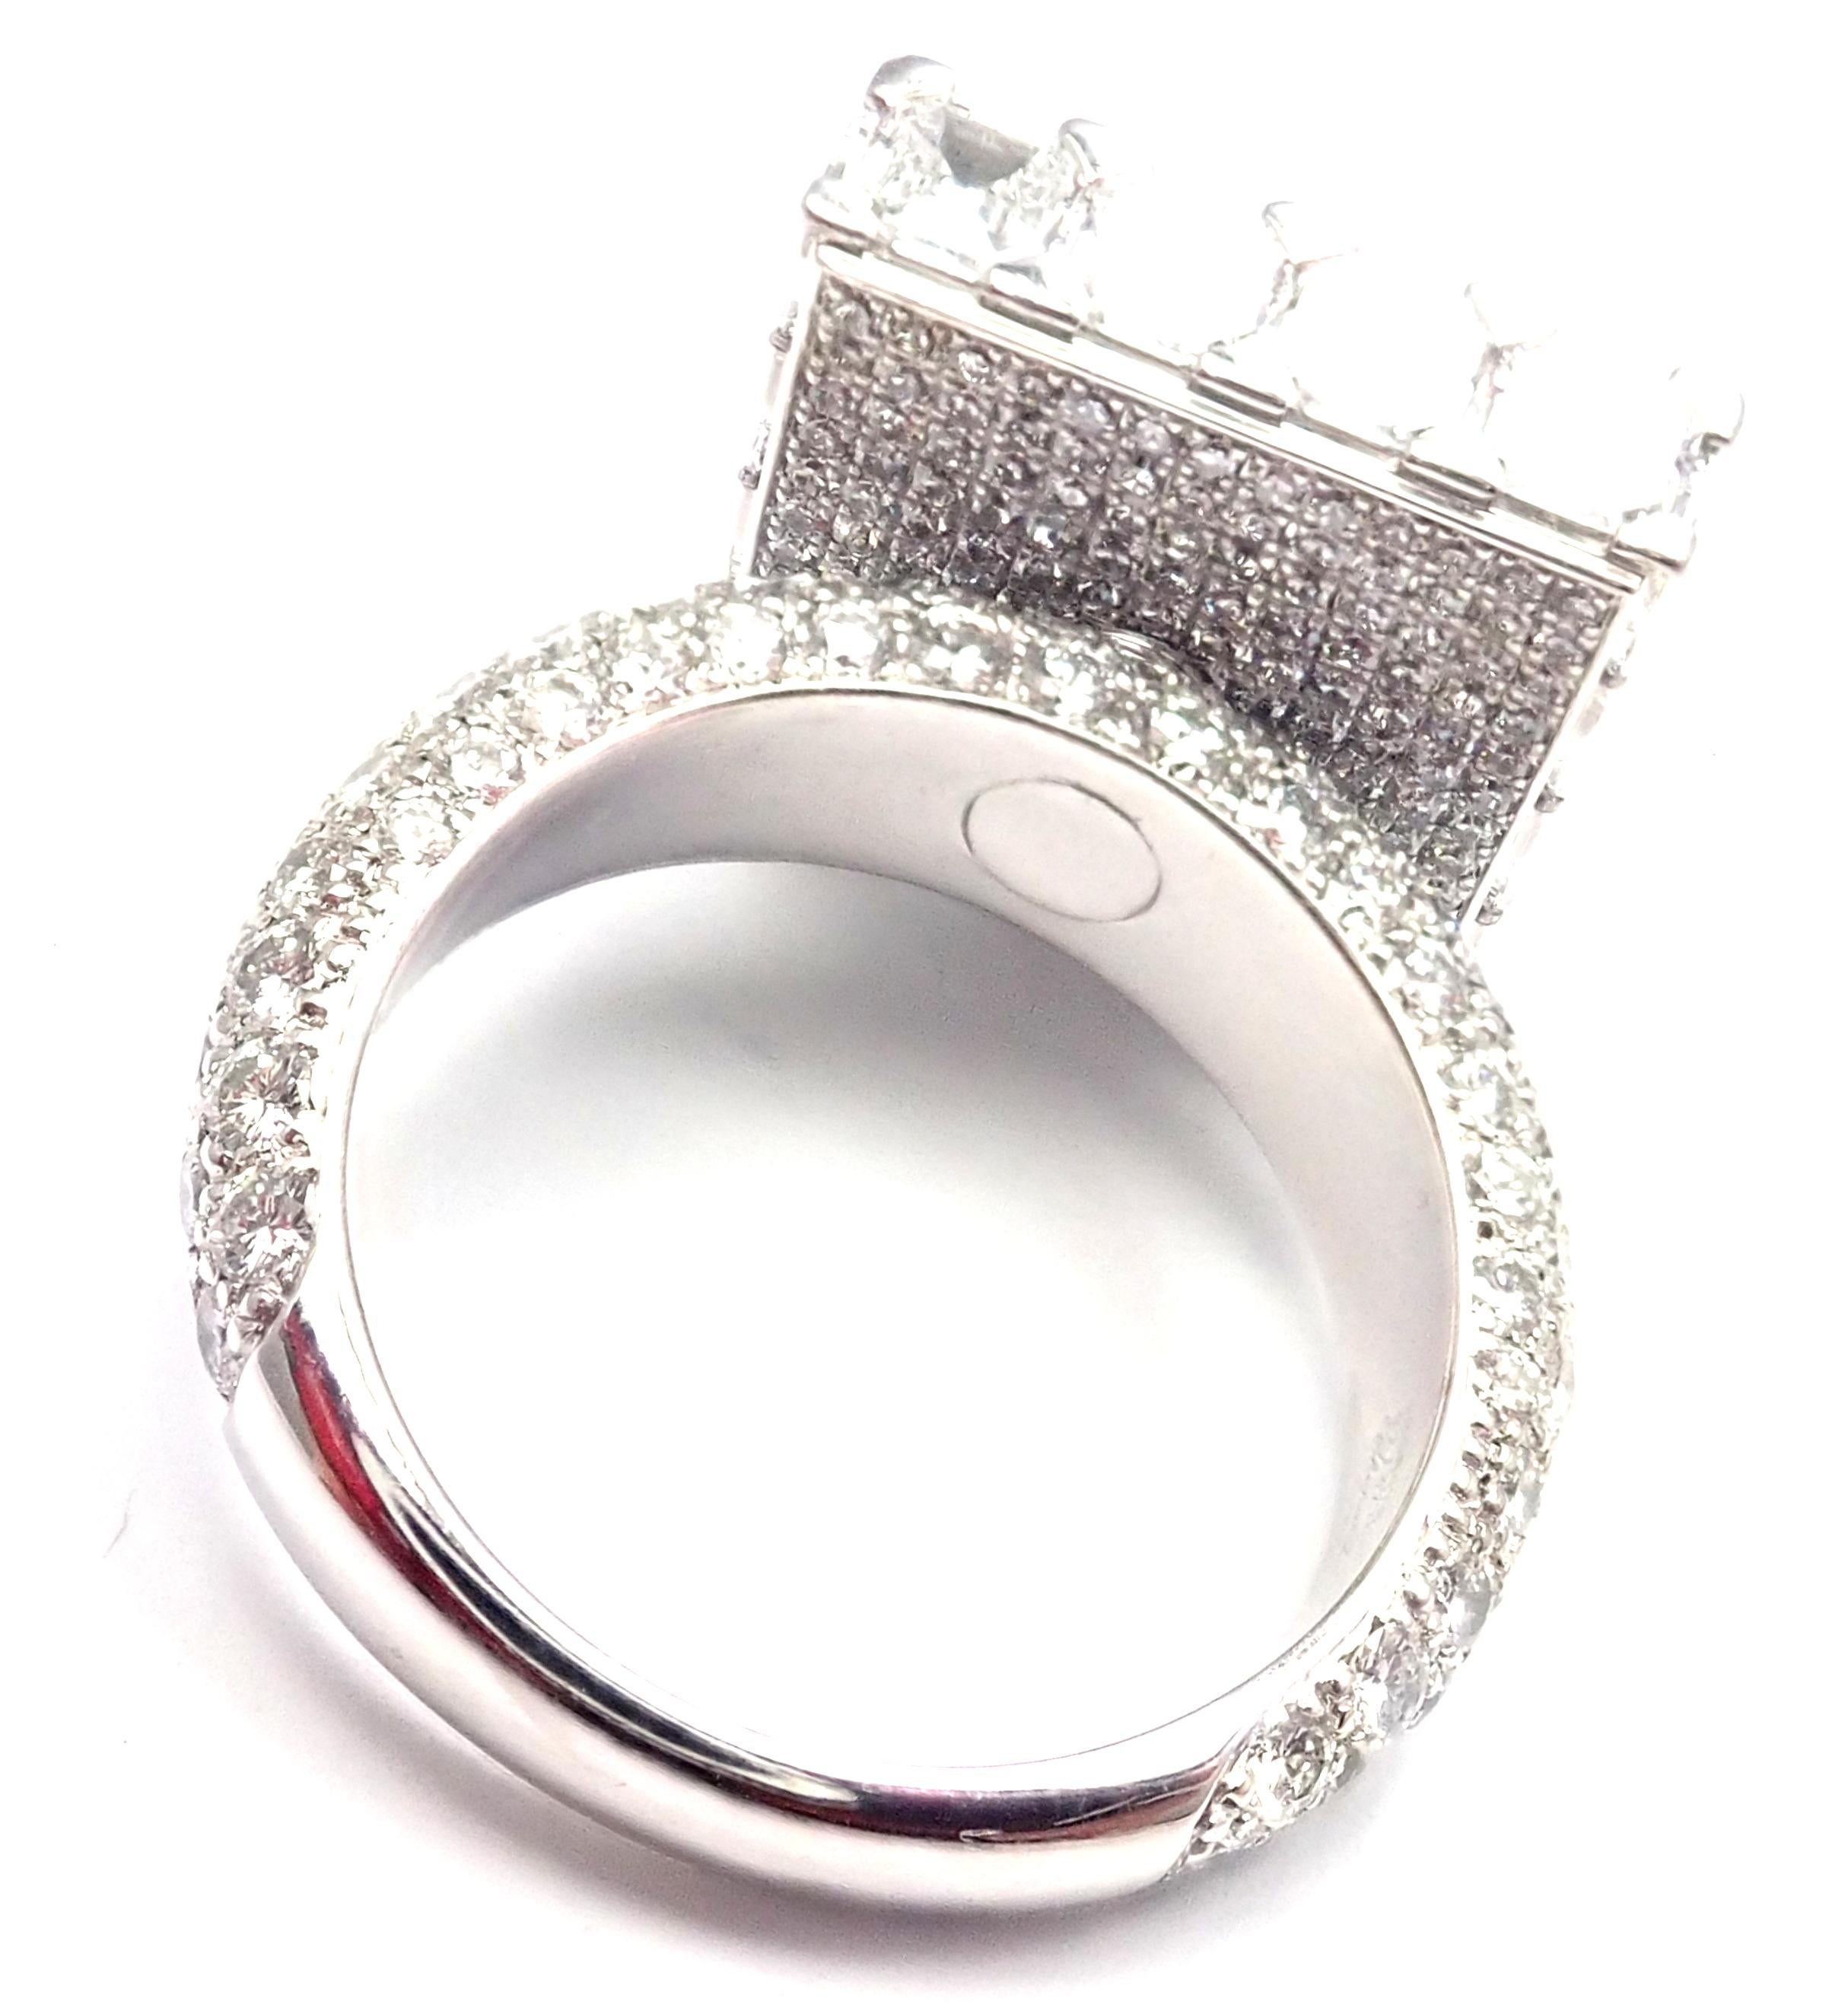 18k White Gold Limited Edition Super Ice Cube 15ct Diamond Rotating Ring by Chopard. 
With 308 square step cut and round brilliant cut diamonds VVS1 clarity, E color total weight approximately 15ct
The top portion of the ring is rotating.
This ring